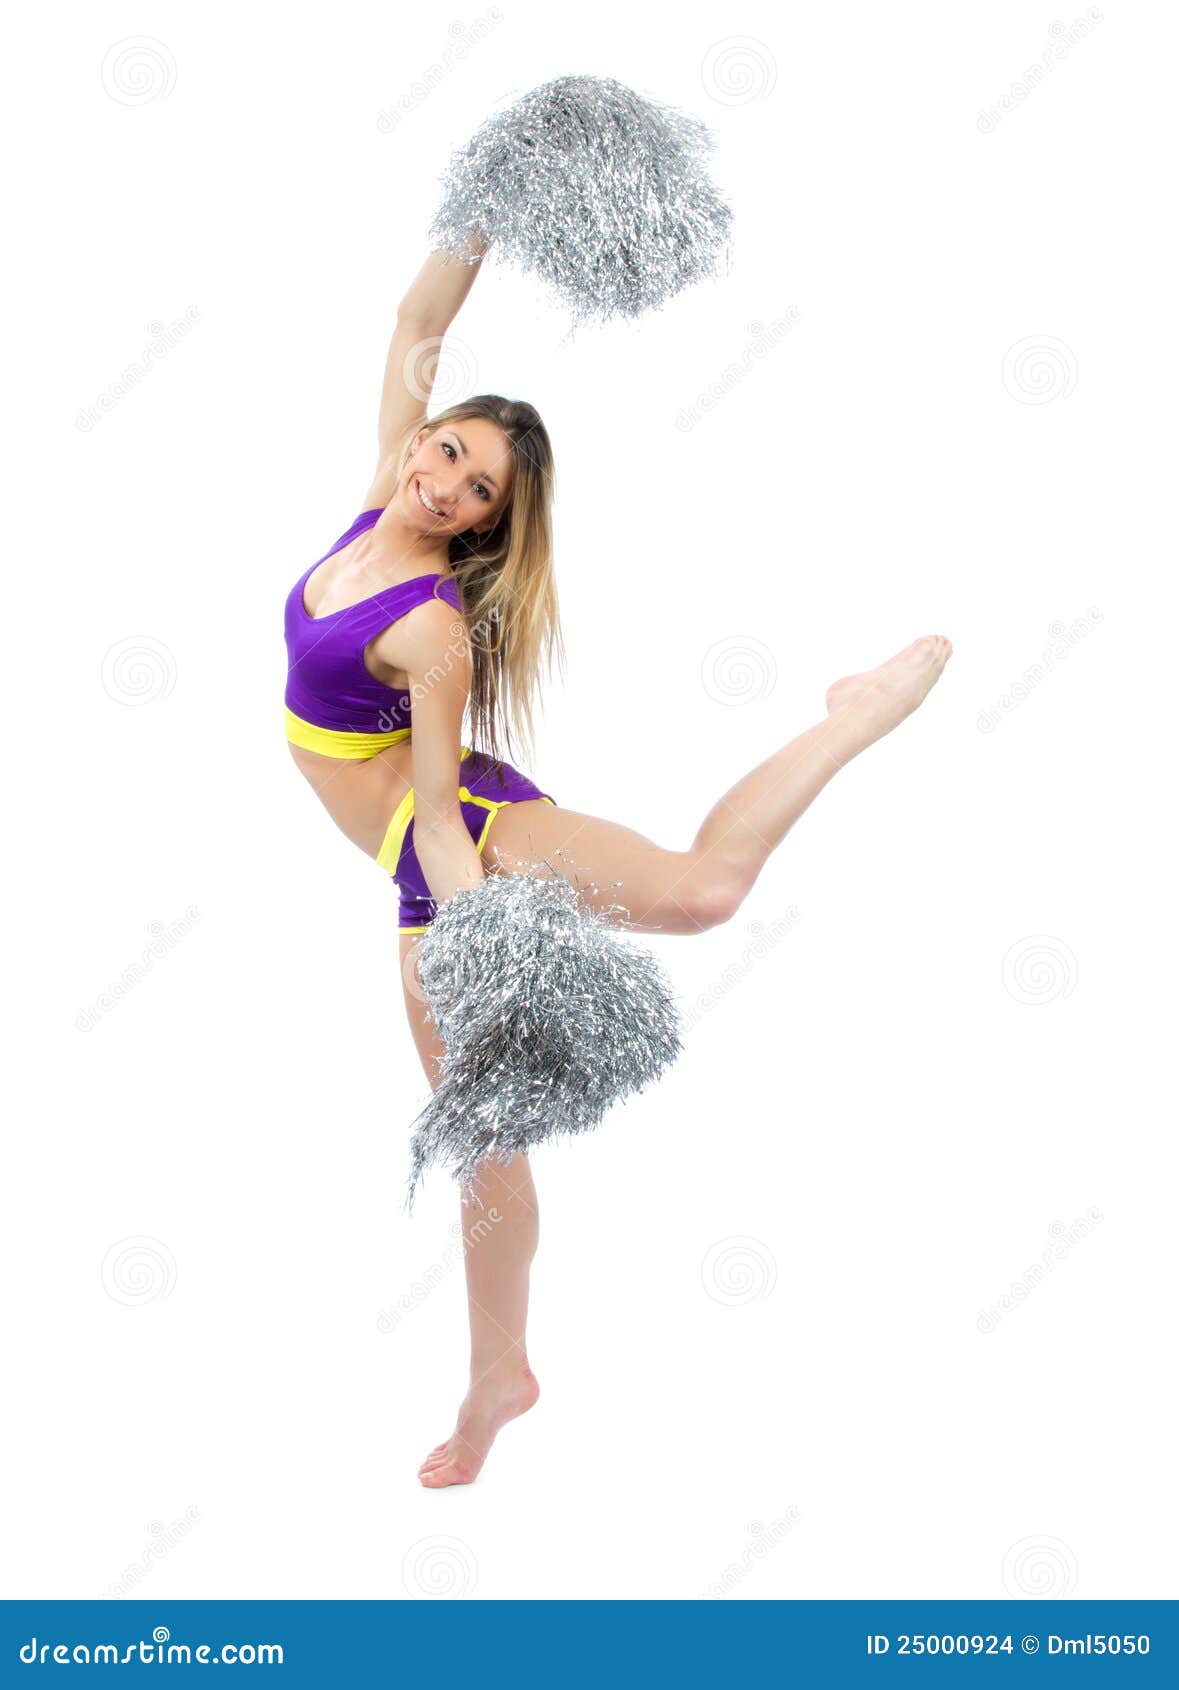 Cheerleader Dancer with Silver Pom Poms Stock Photo - Image of performance, aerobics: 25000924